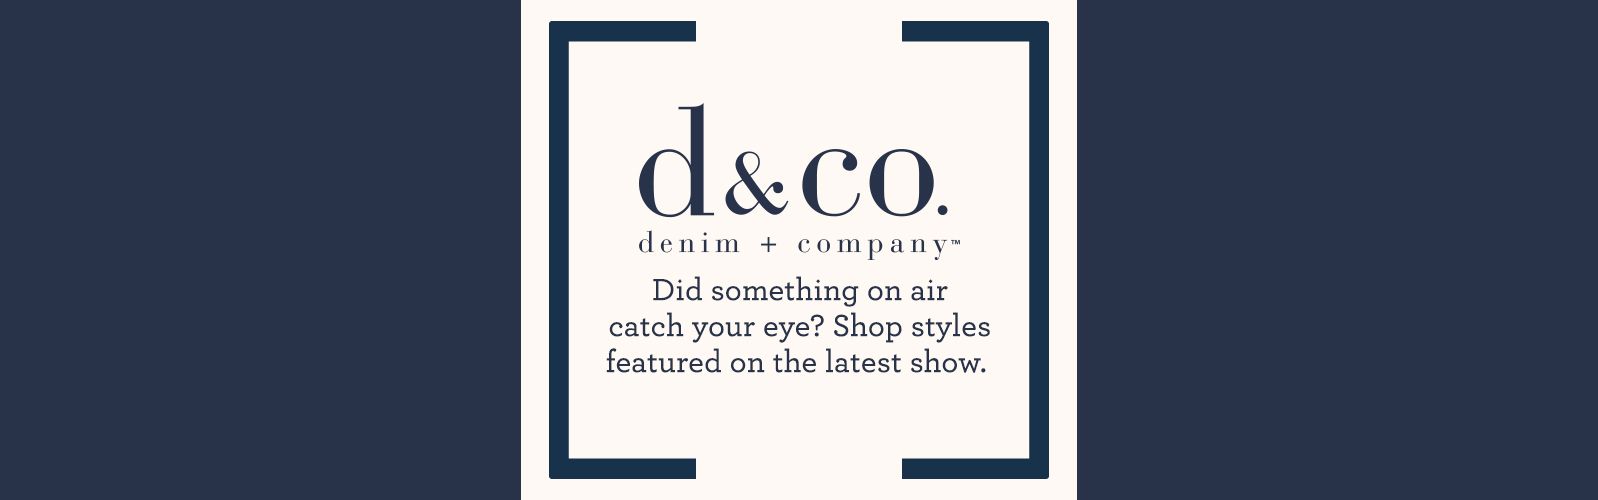 Denim & Co.®  Did something on air catch your eye? Shop styles featured on the latest show. 